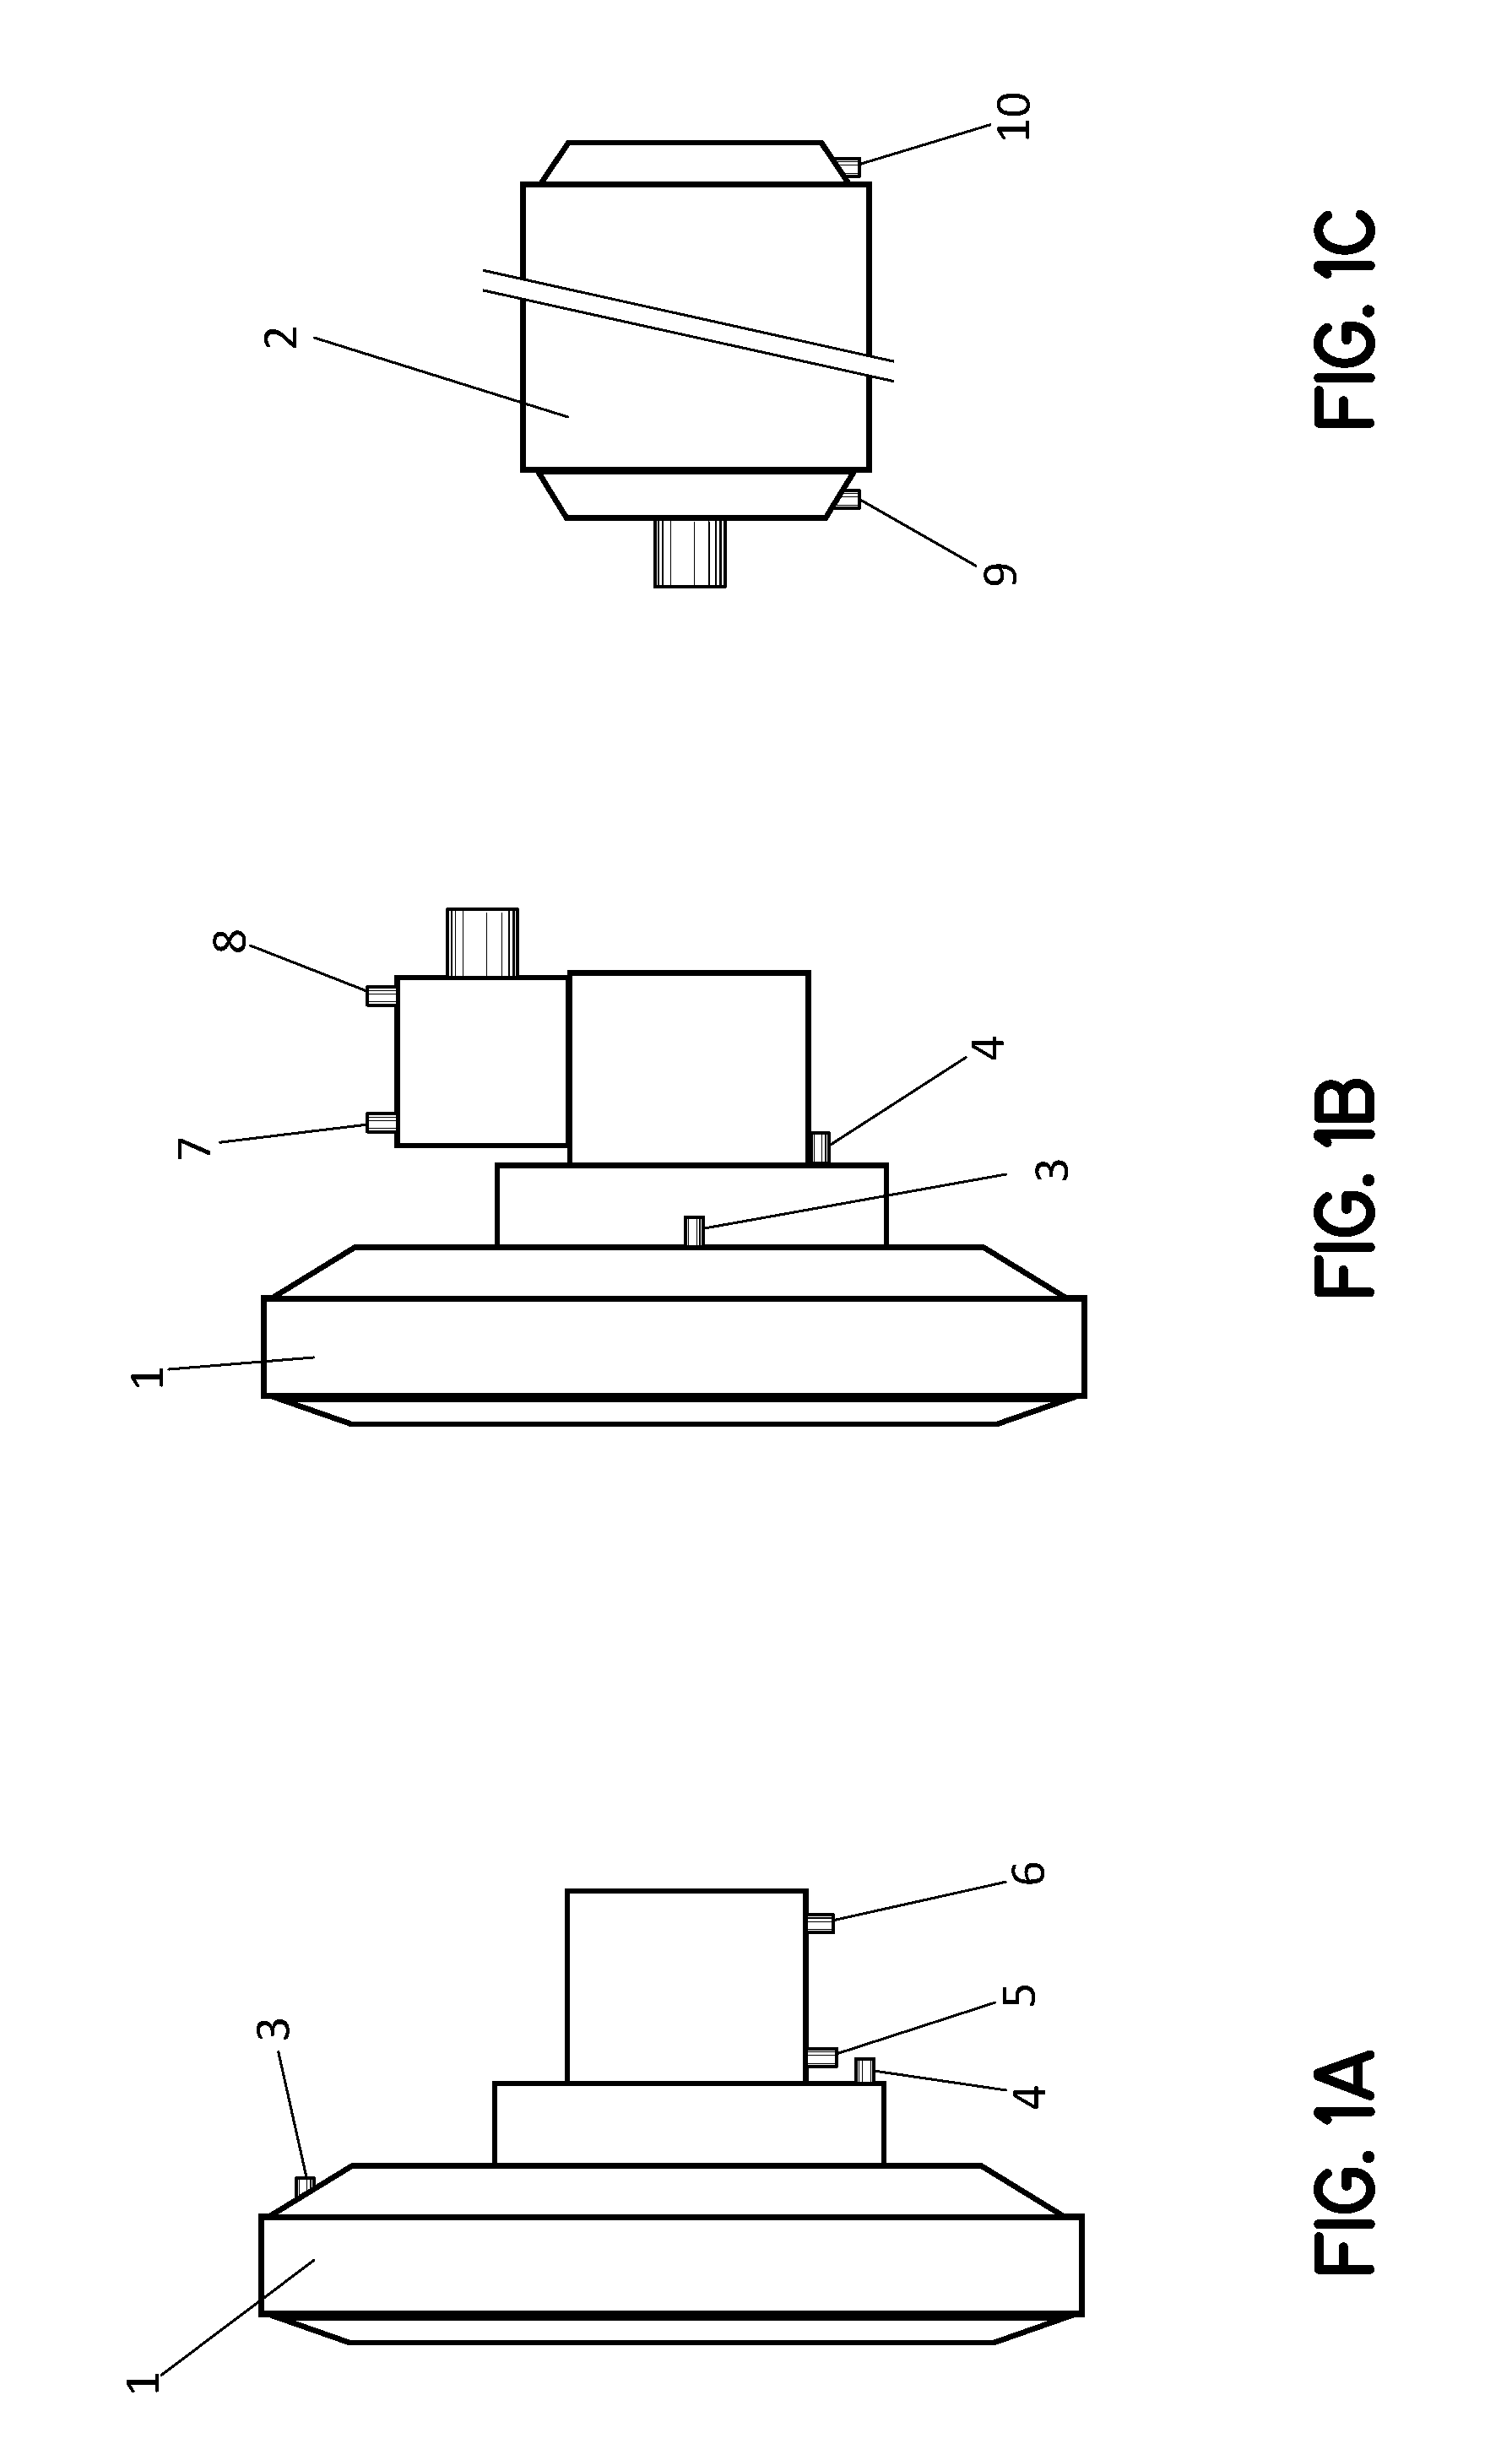 Method and system for controlling operation of a wind turbine